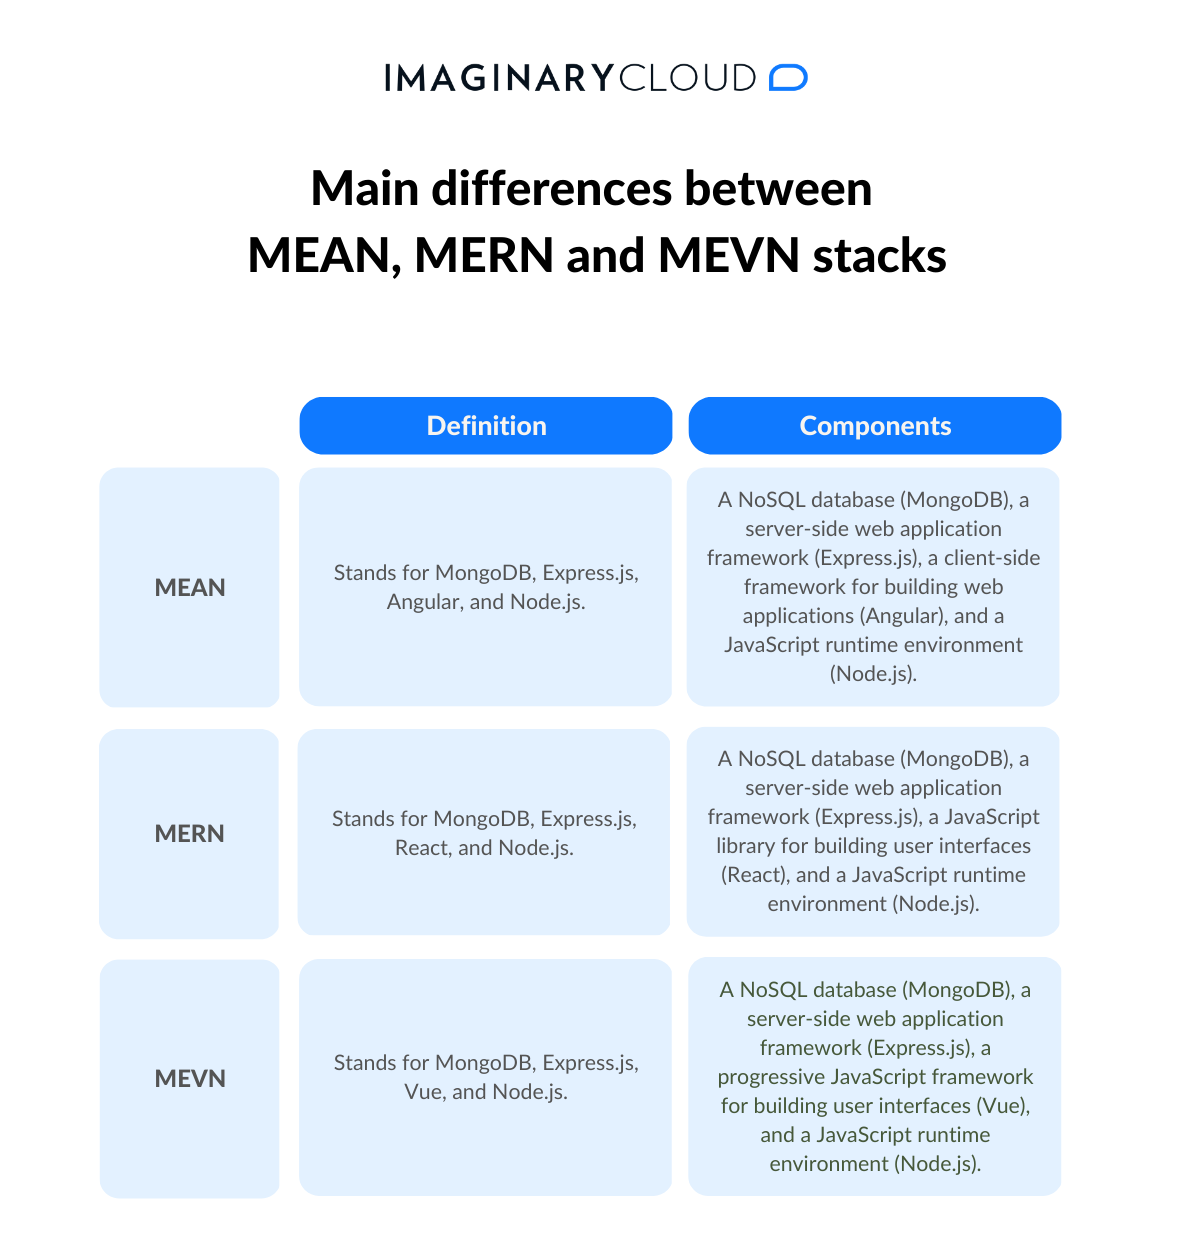 Table comparing the differences between MEAN, MERN and MEVN.